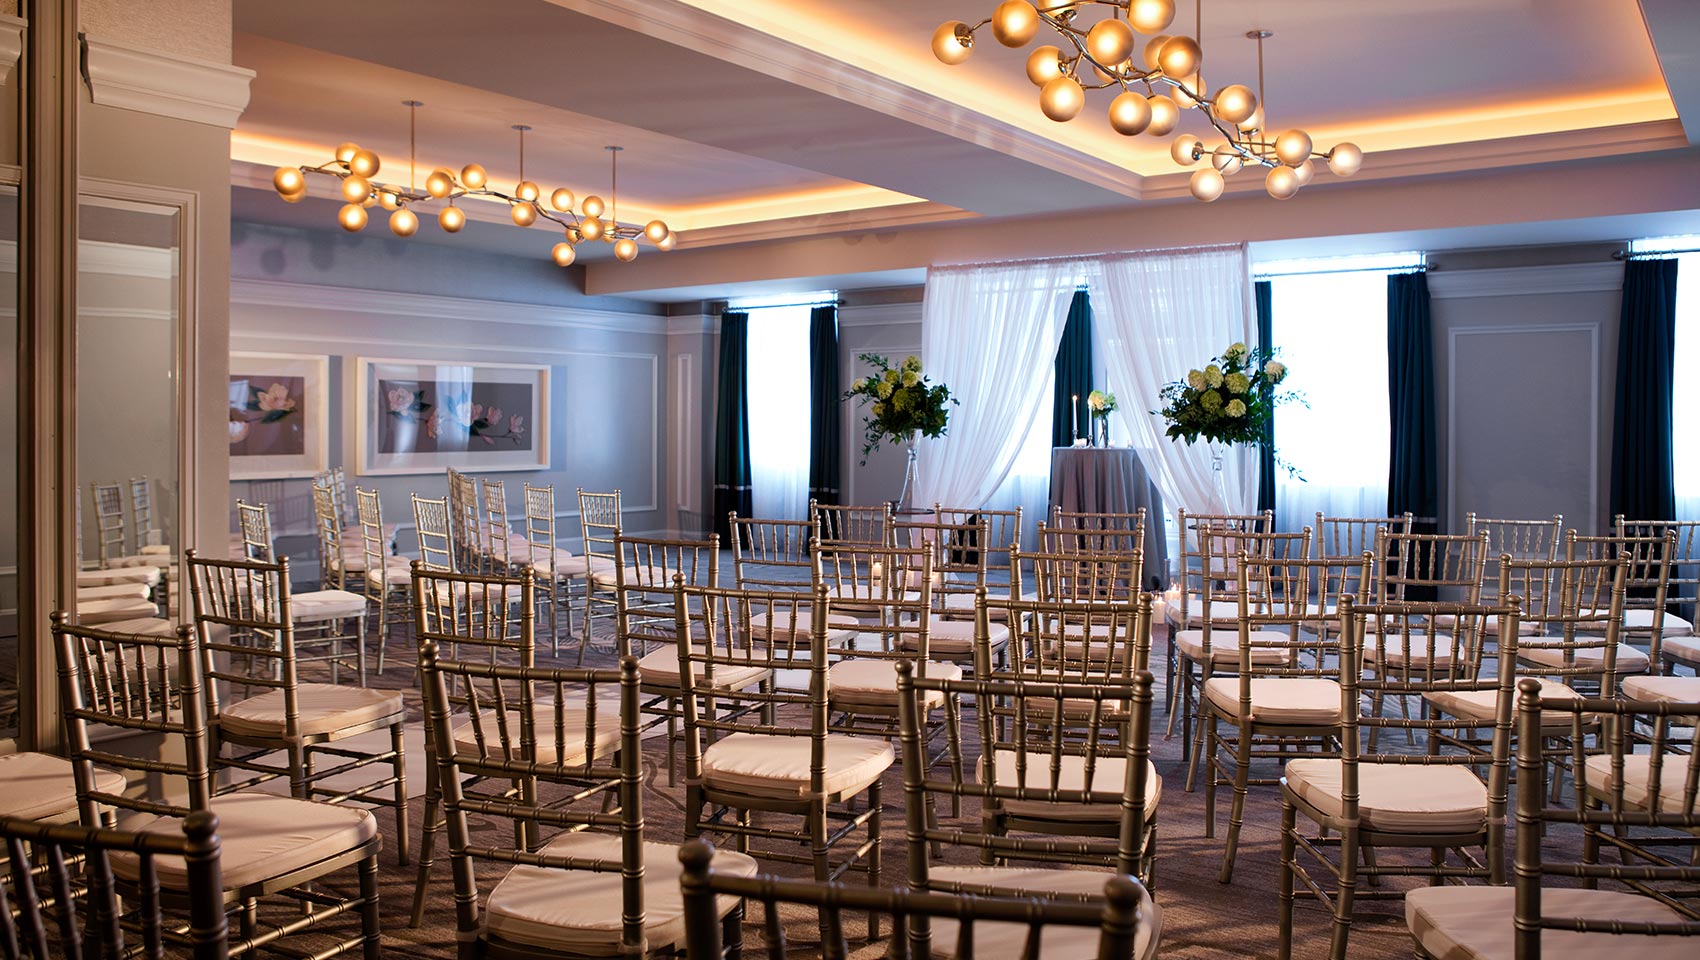  Wedding Venues In Winston Salem Nc in the world The ultimate guide 